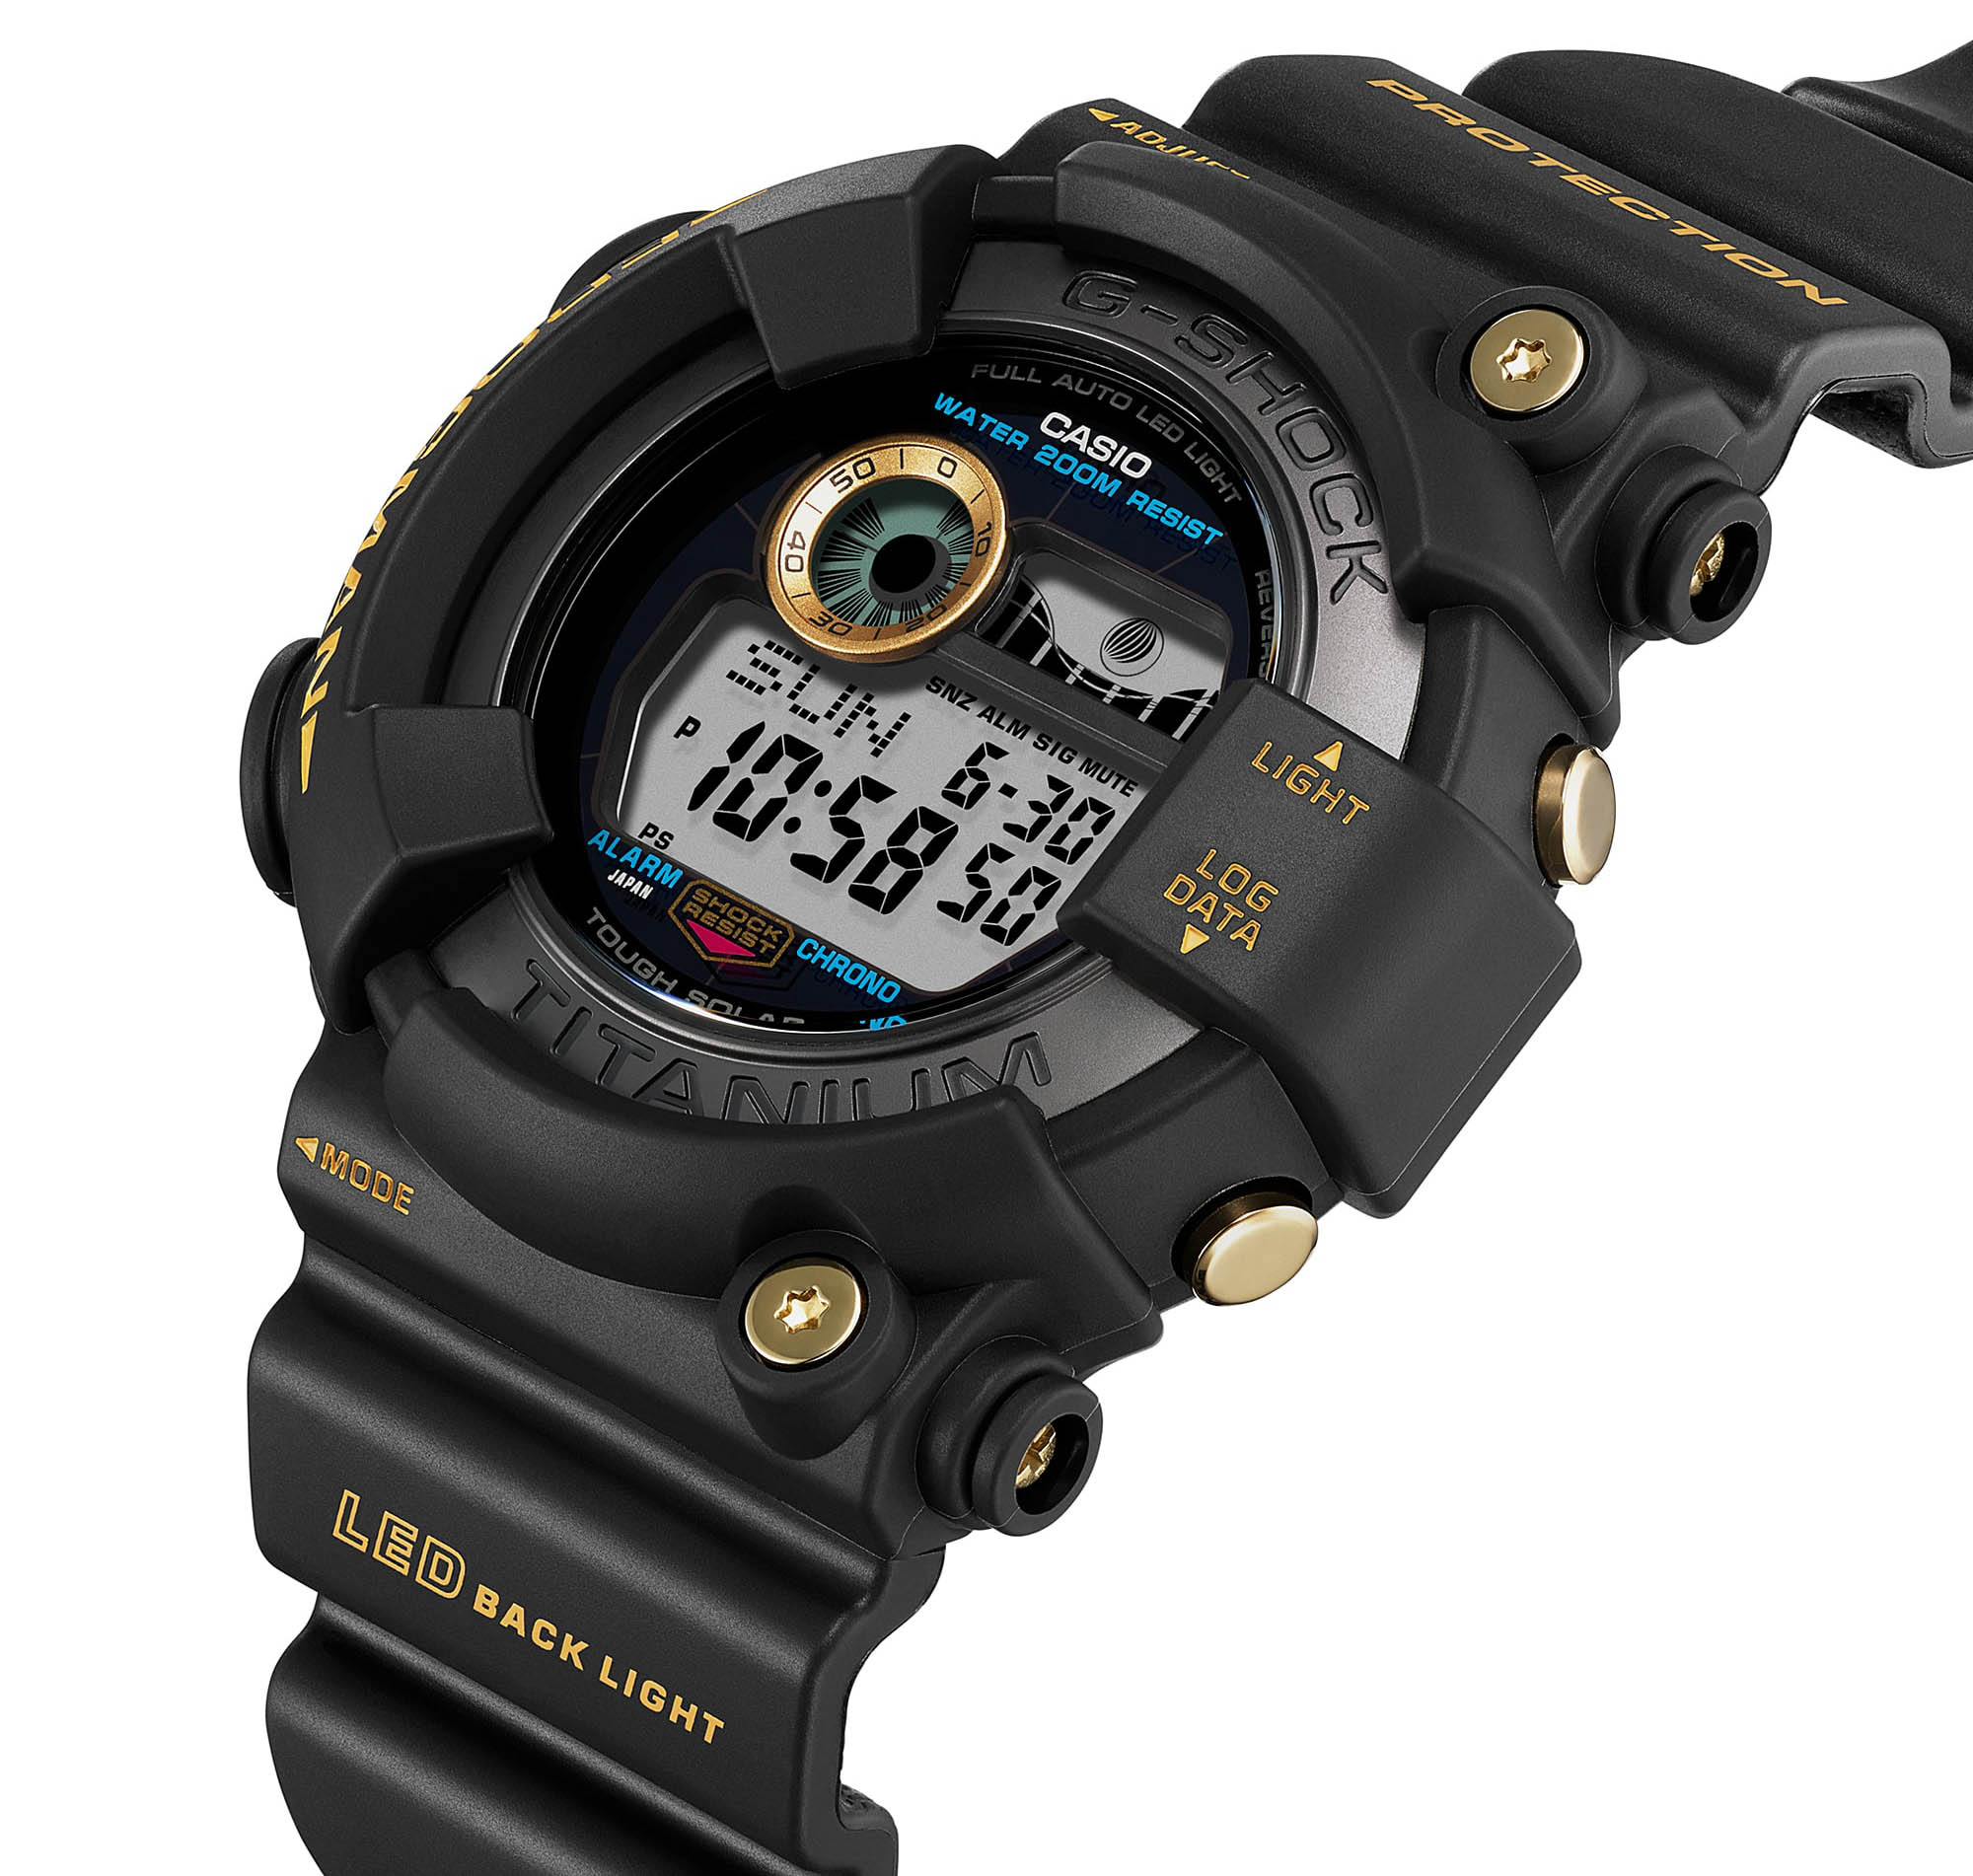 Alternativt forslag Andet vedlægge Casio Debuts The G-Shock Frogman GW8230B 30th Anniversary Dive Watch |  aBlogtoWatch